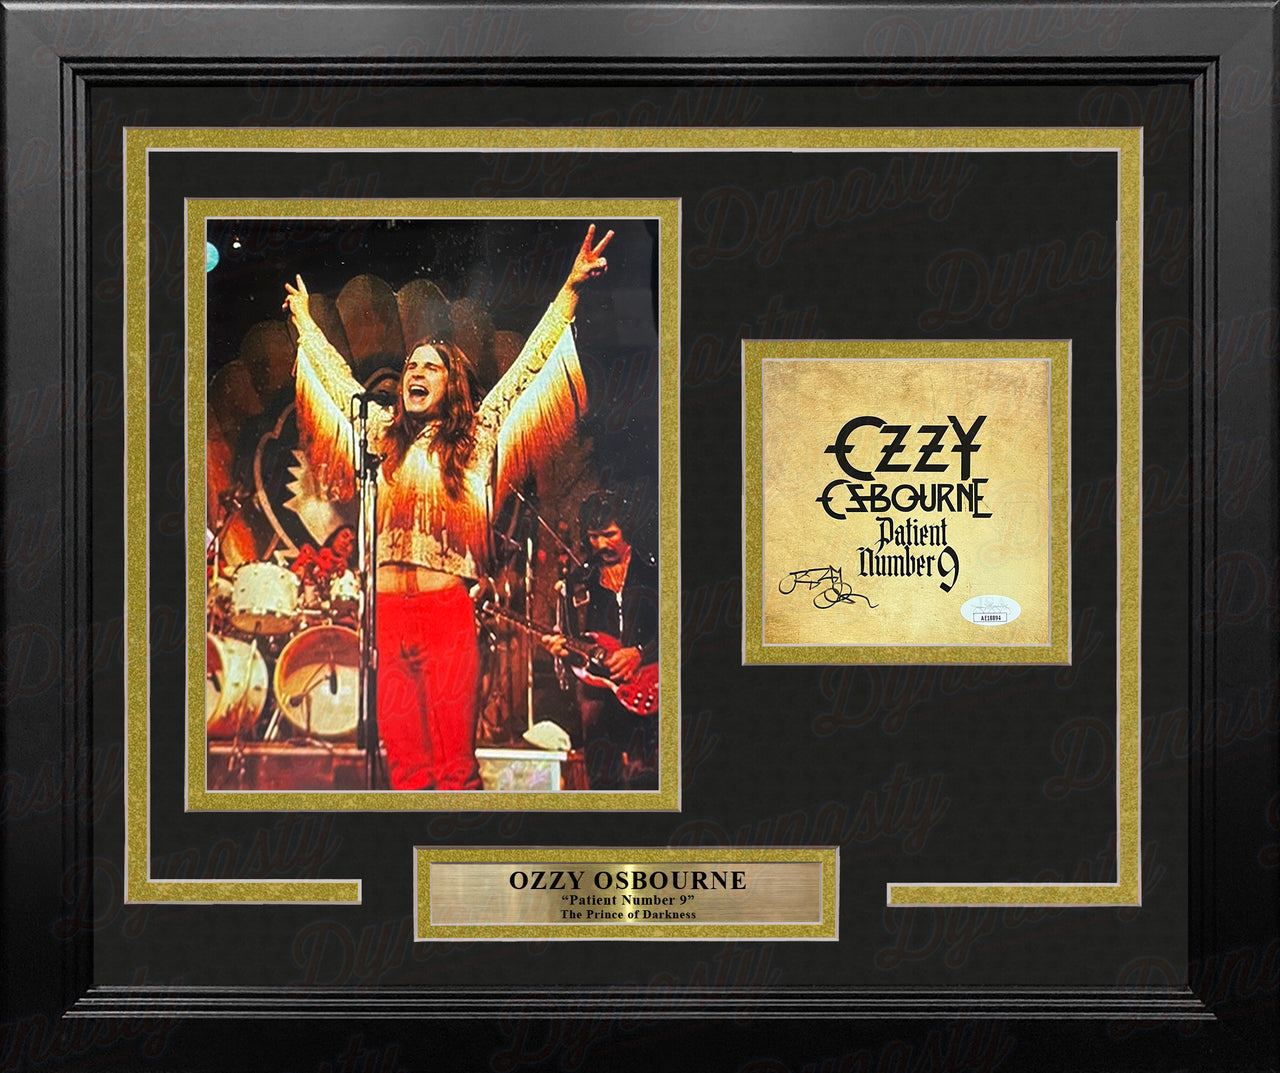 Ozzy Osbourne Autographed Patient Number 9 CD Booklet with Framed Photo Collage - Dynasty Sports & Framing 